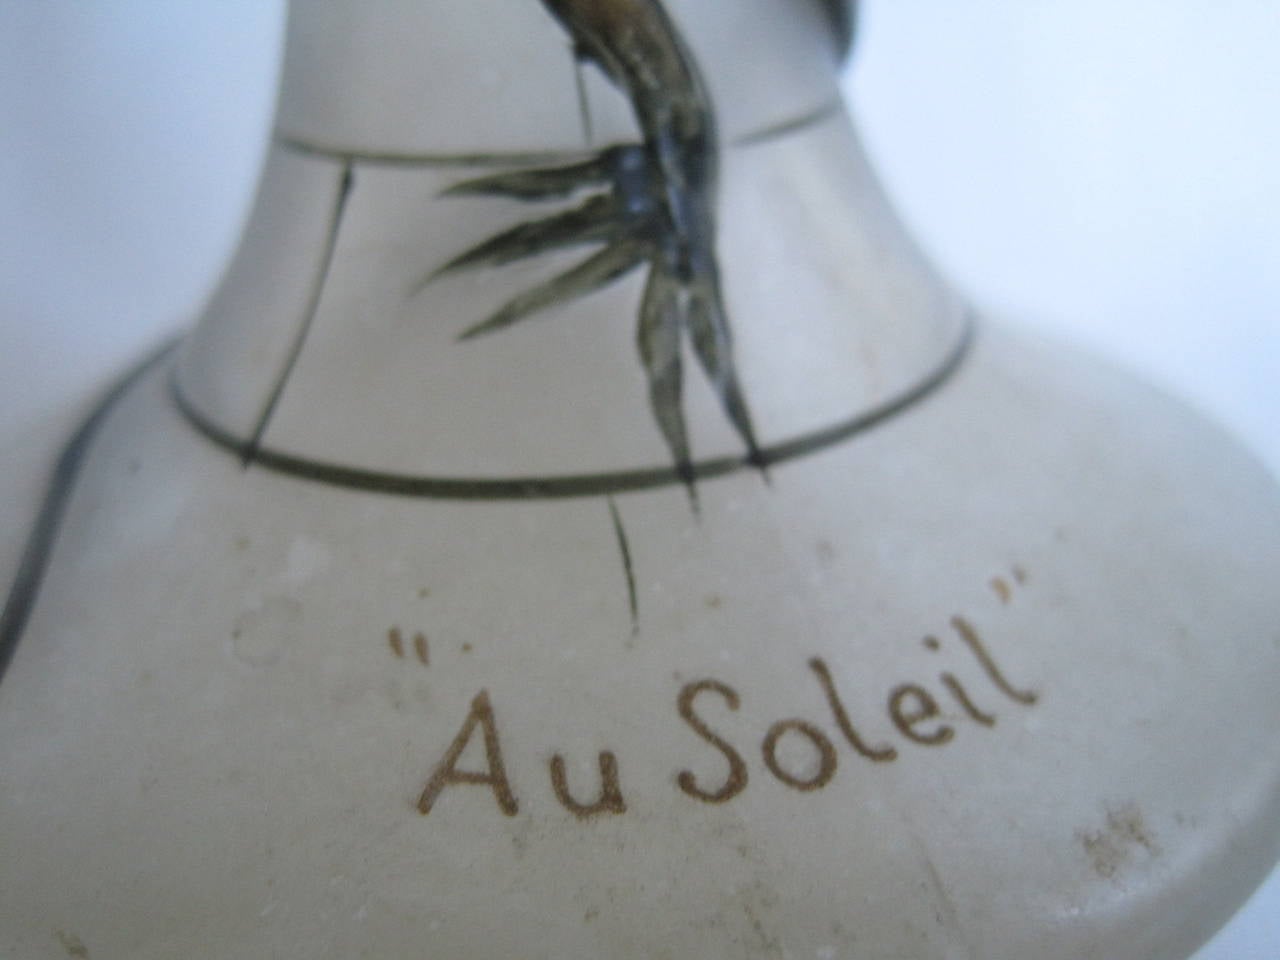 Designed by Maurice Depinoix in 1912, France. This green and white frosted glass bottle for Lubin's 